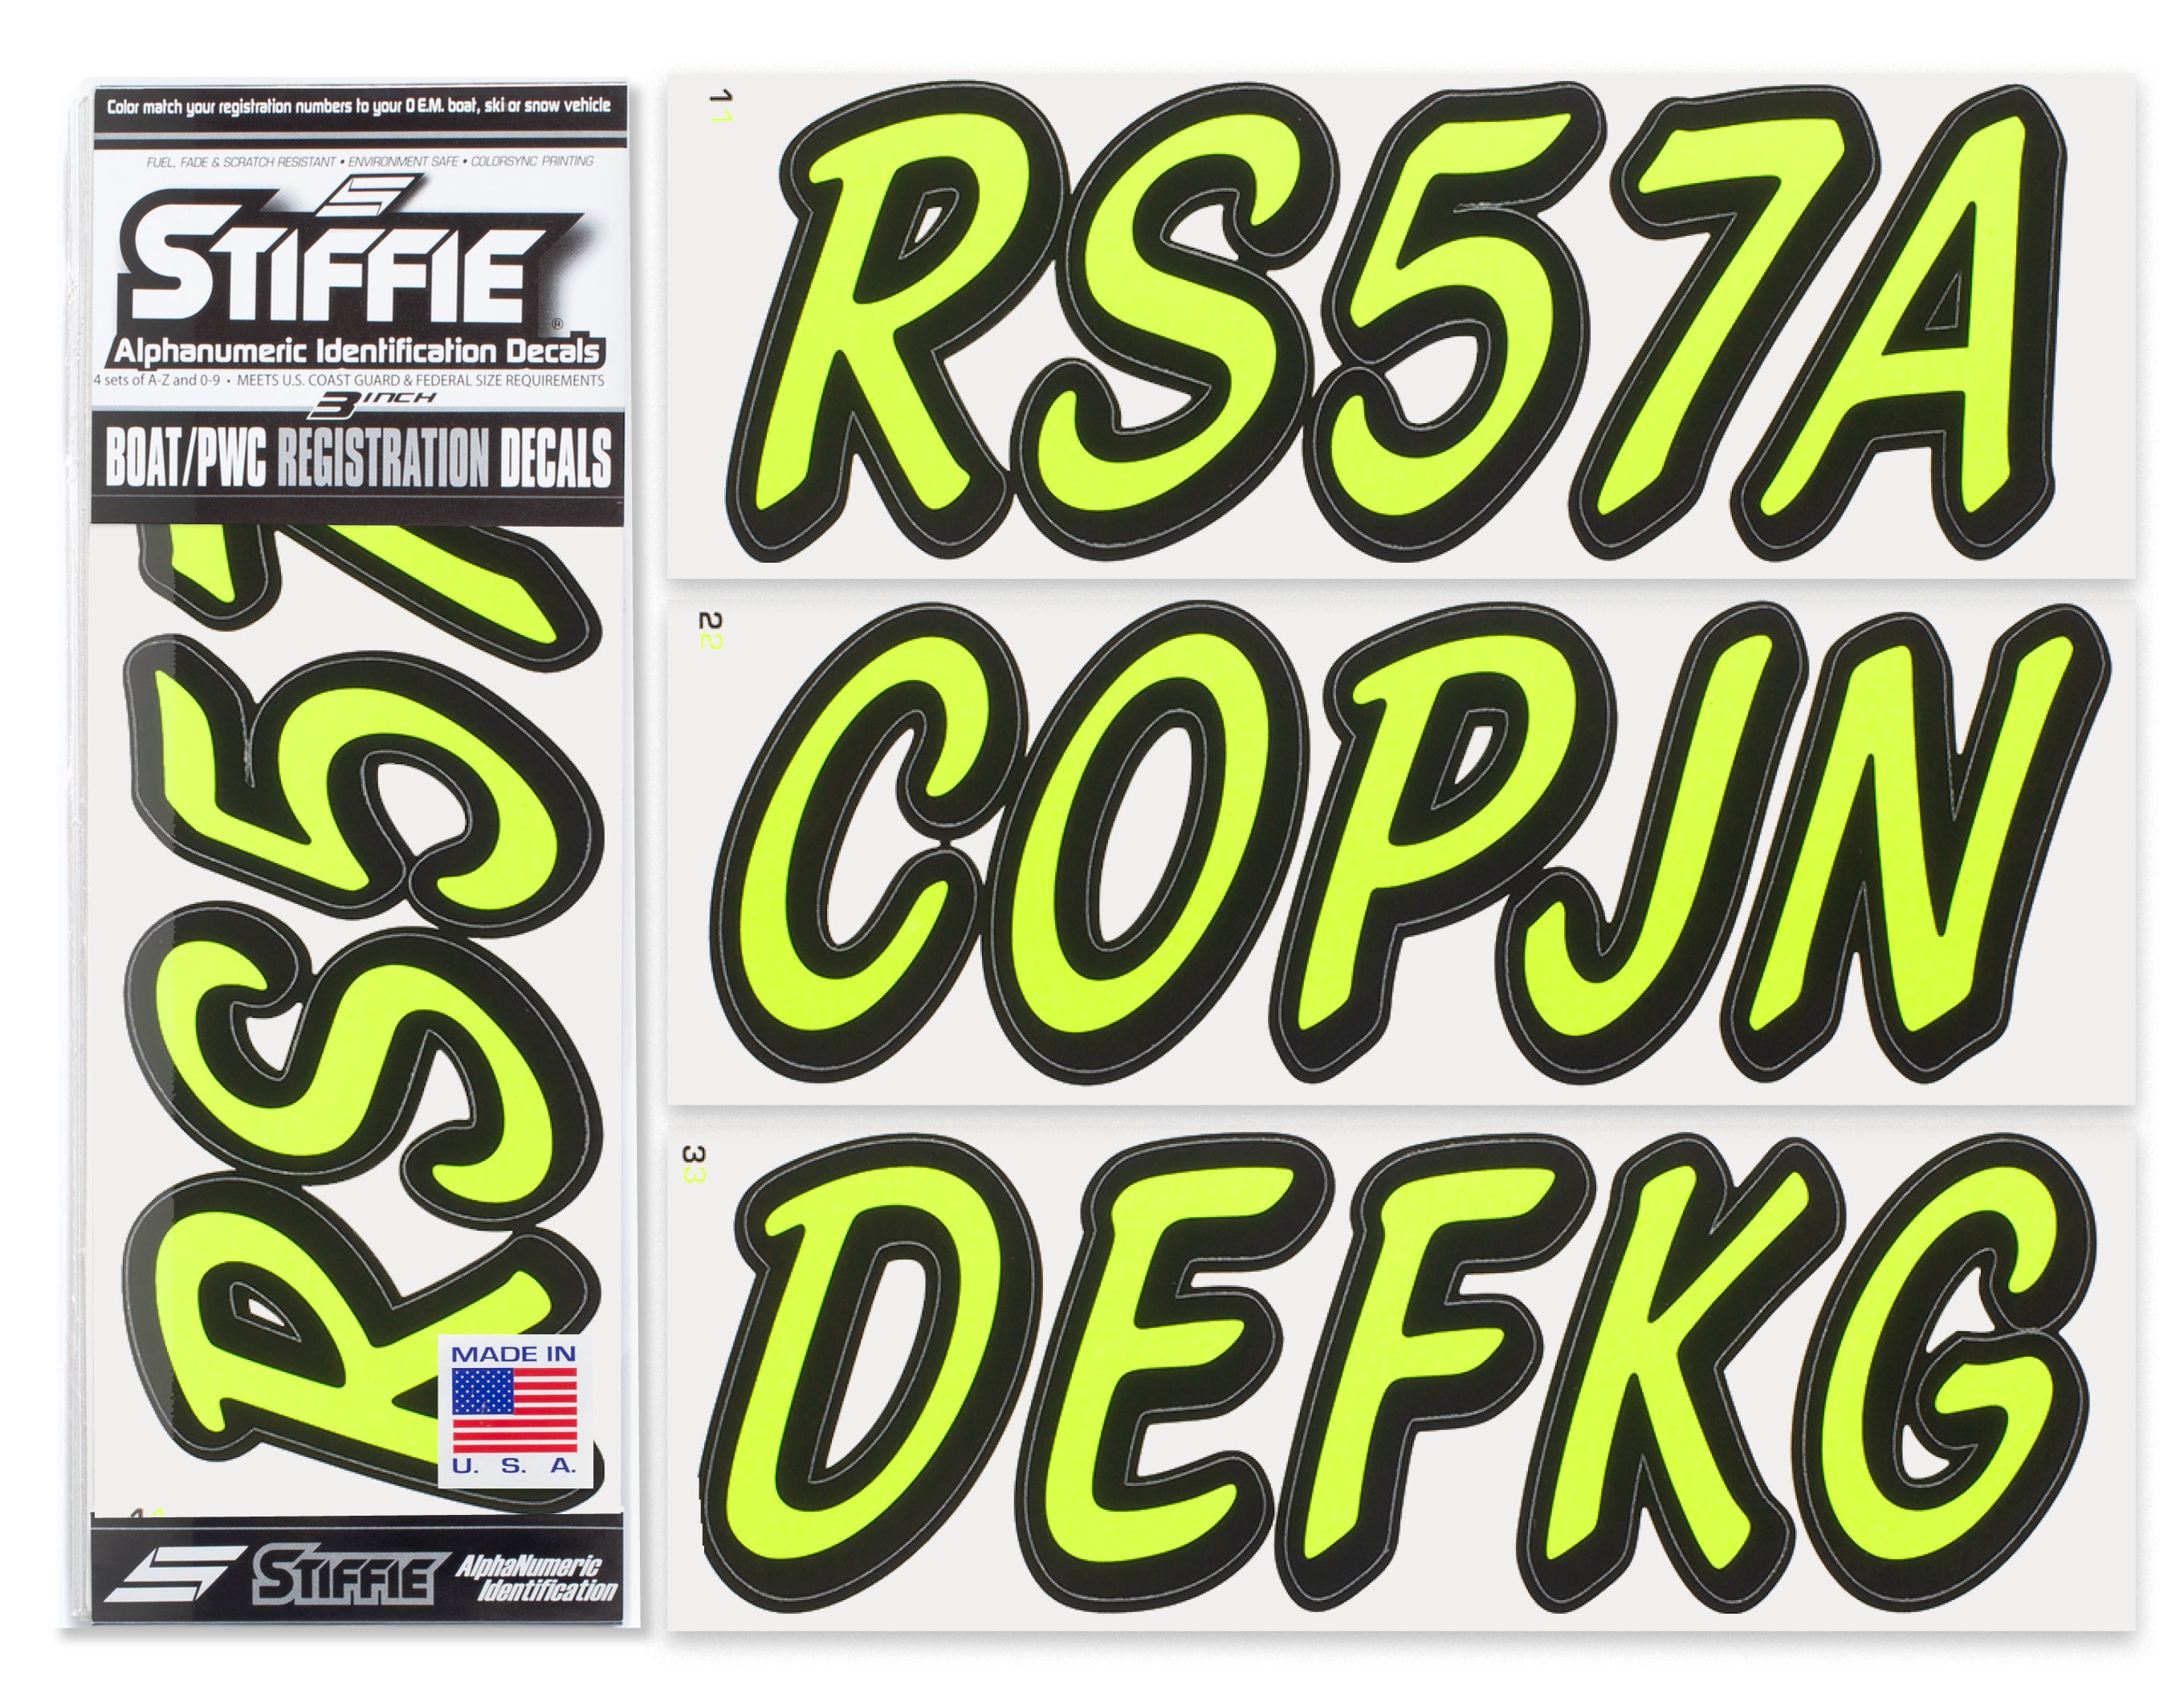 STIFFIE Whipline Solid Day Glow Yellow/Black 3" Alpha-Numeric Registration Identification Numbers Stickers Decals for Boats & Personal Watercraft